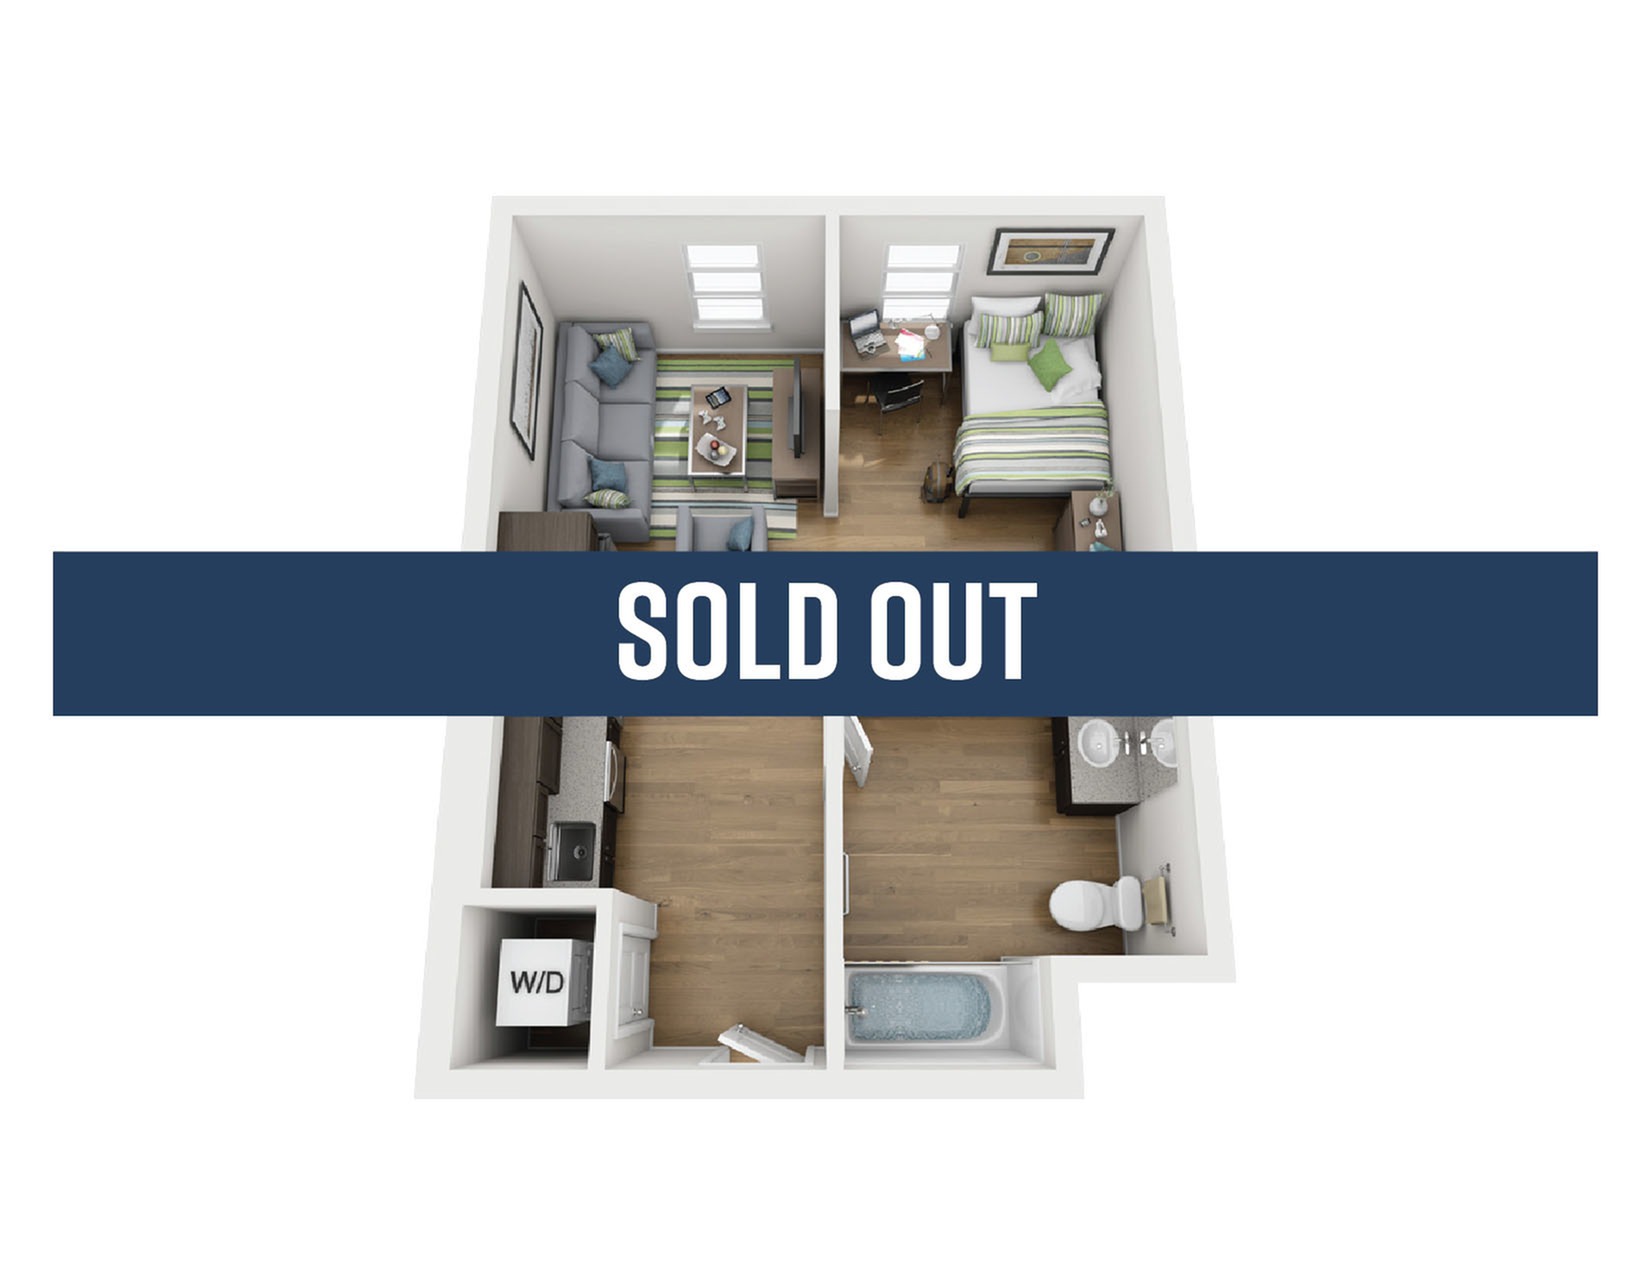 SOLD OUT - 1BR/1BA - MISSION